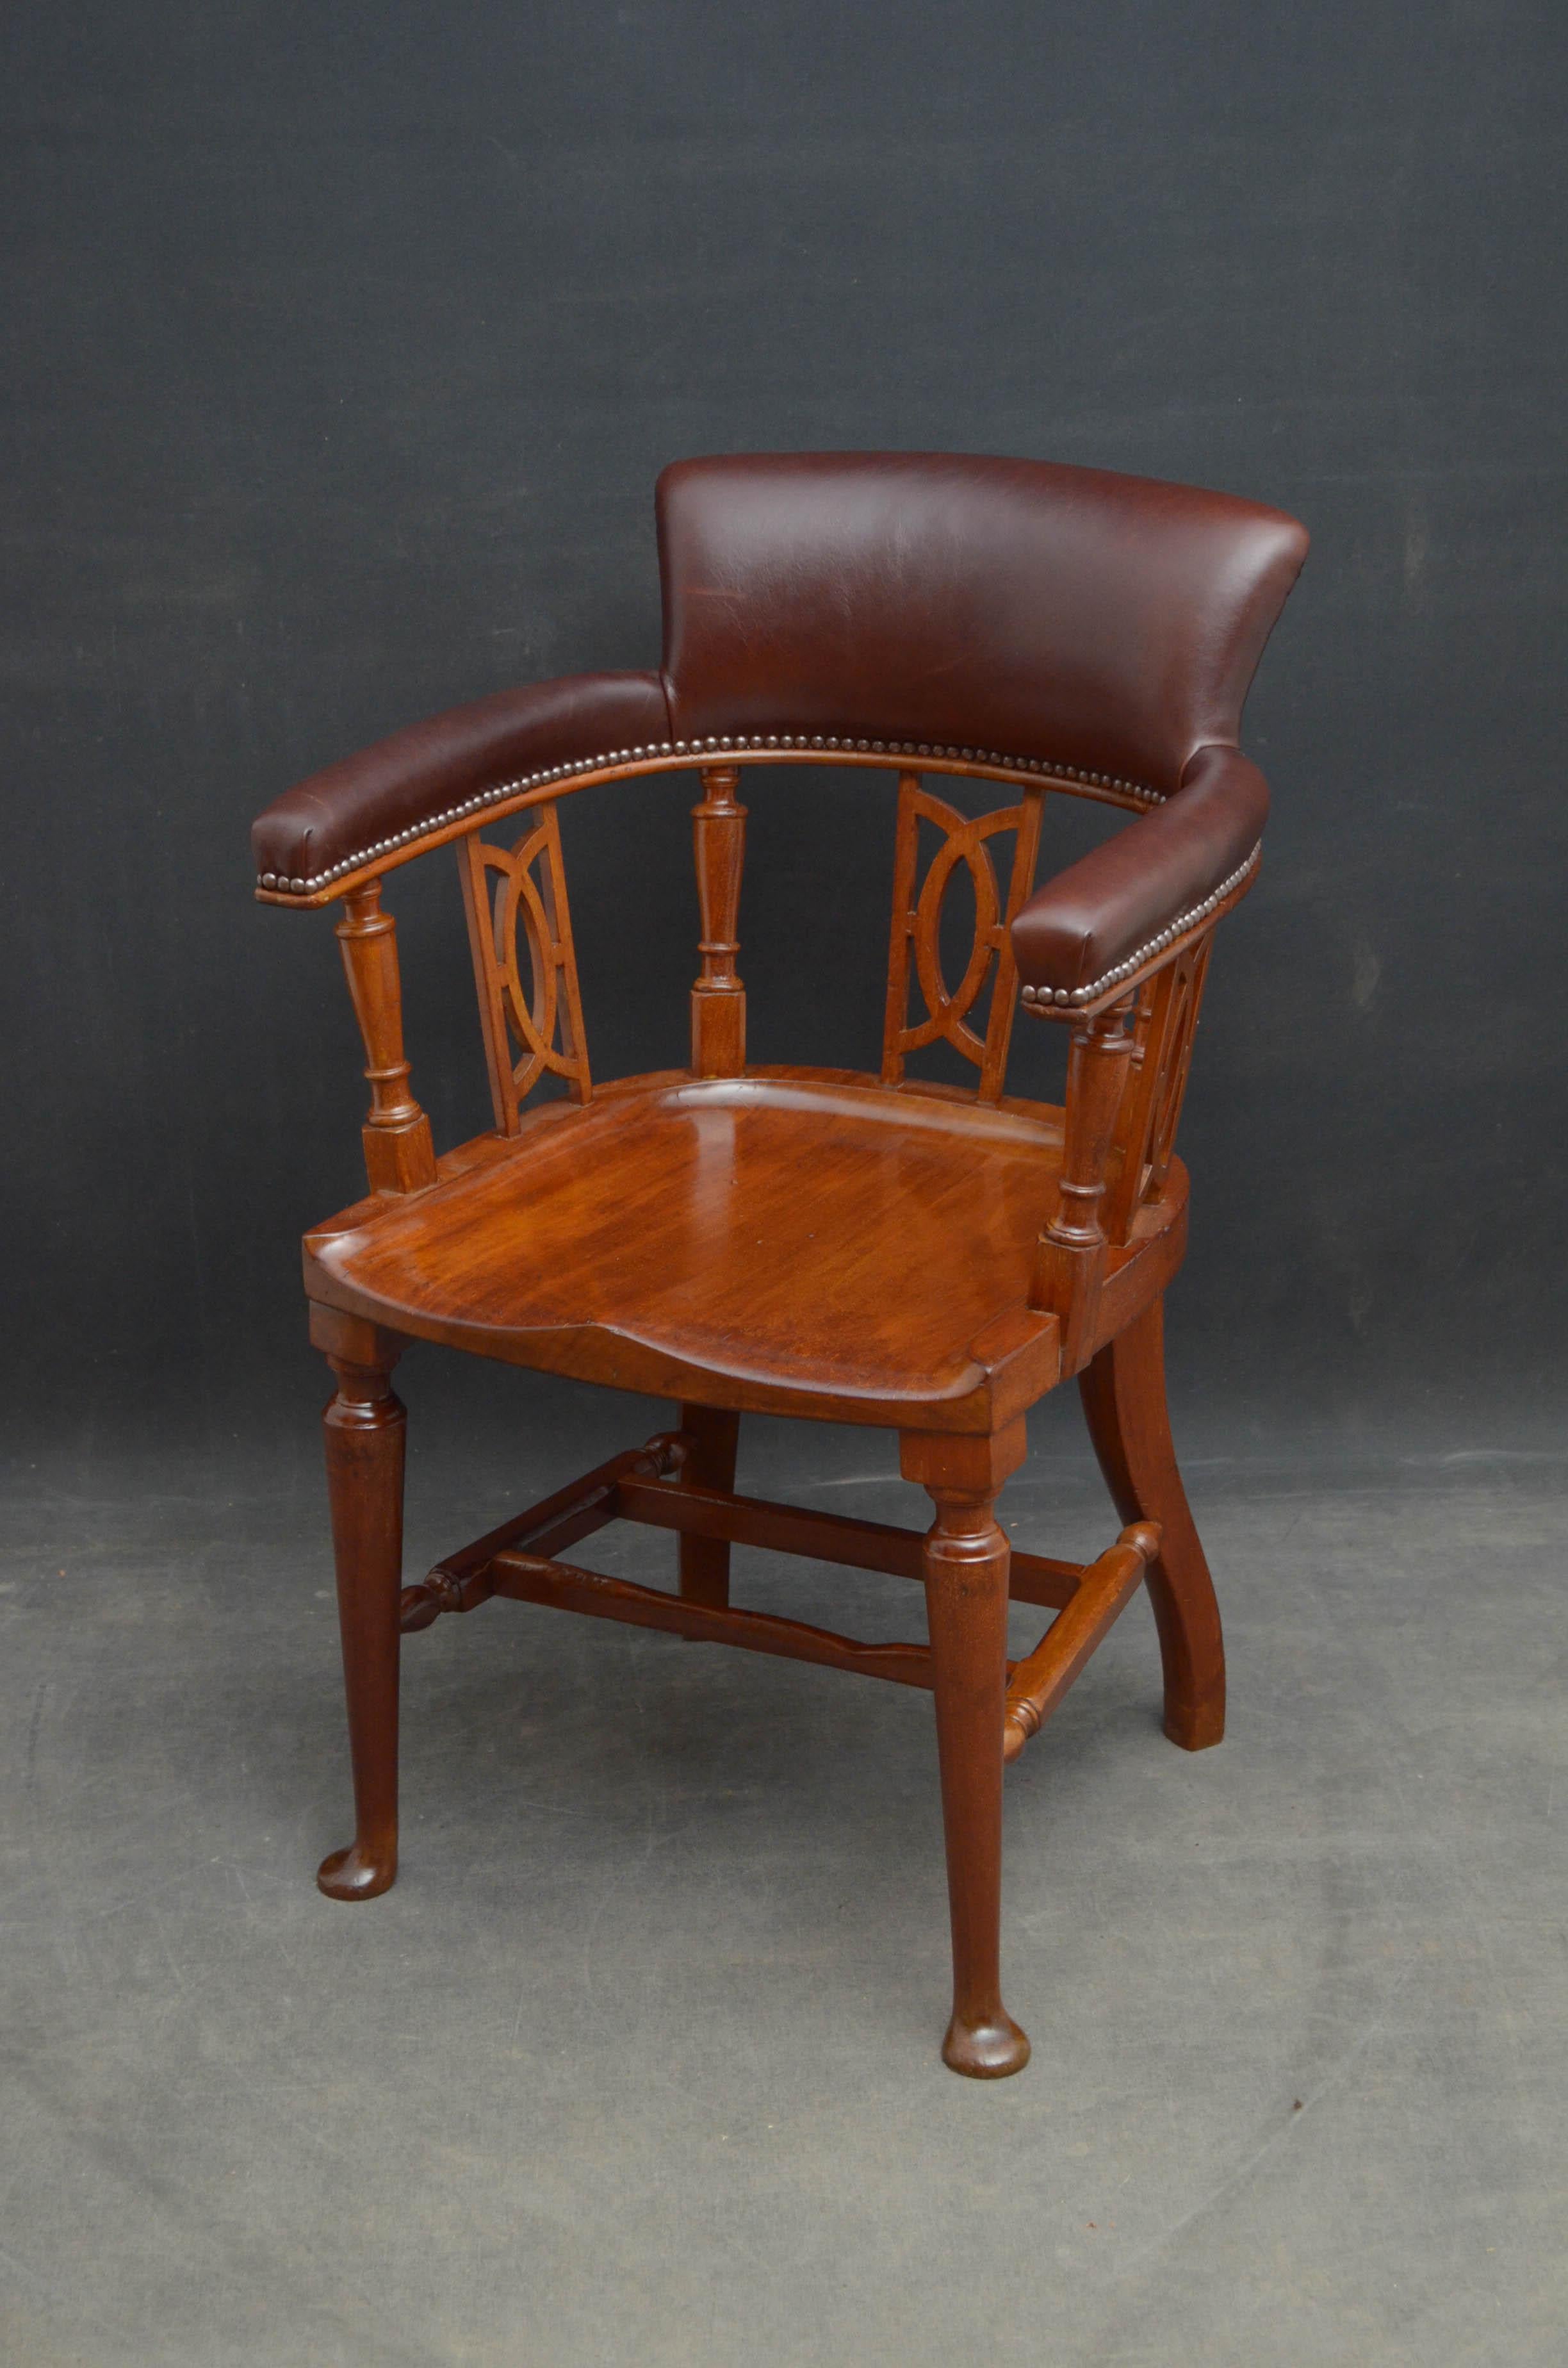 Sn4642 Victorian solid mahogany office chair, having shaped top rail and open arms upholstered in fine quality brown leather with closely studded edge on shaped and turned supports, generous seat and turned legs terminating in pad feet, all united